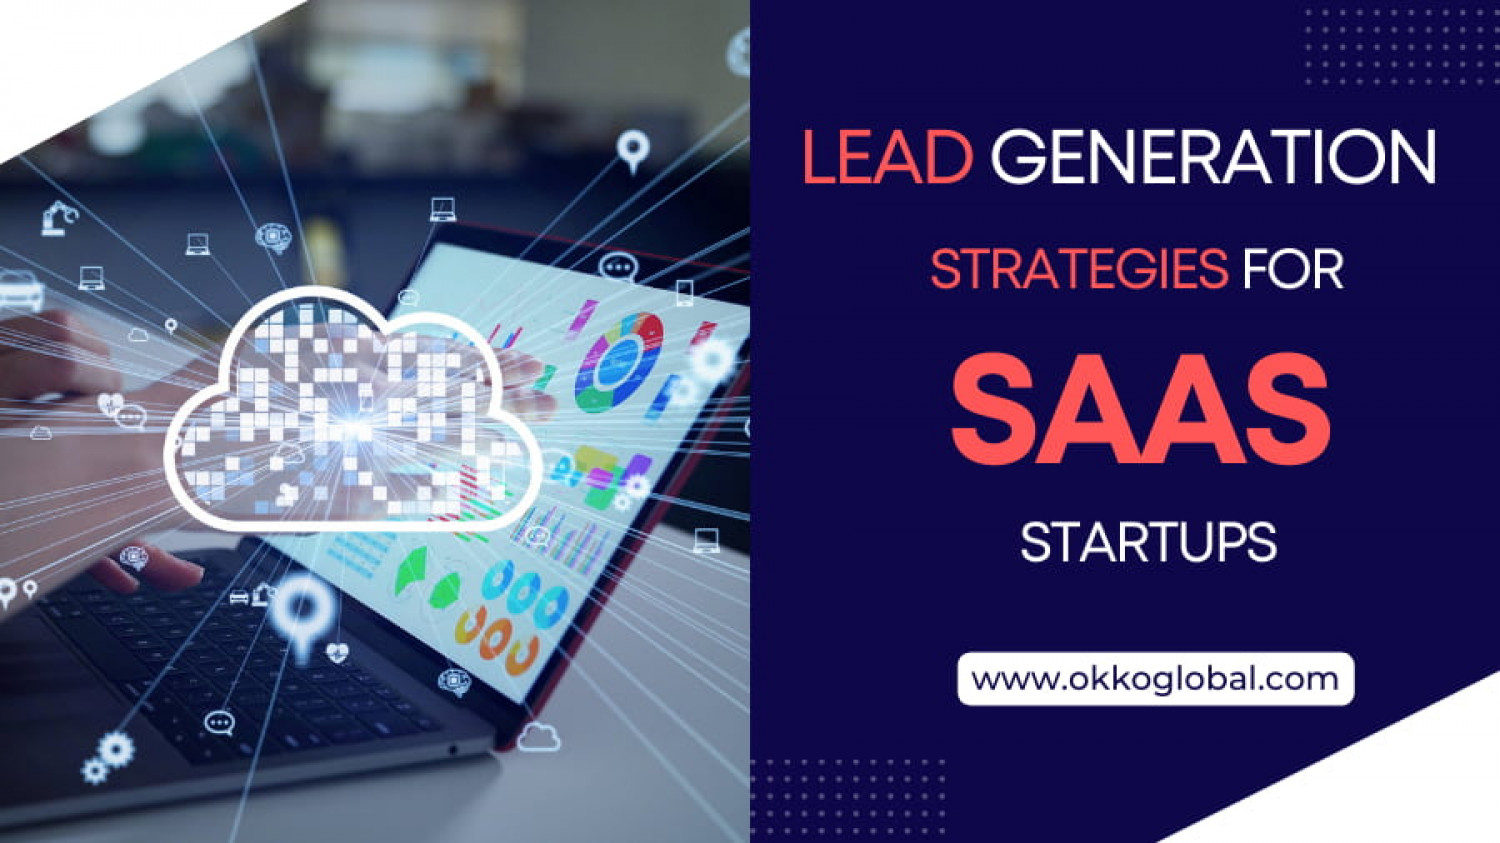 Lead Generation Strategies for SaaS Startups Infographic